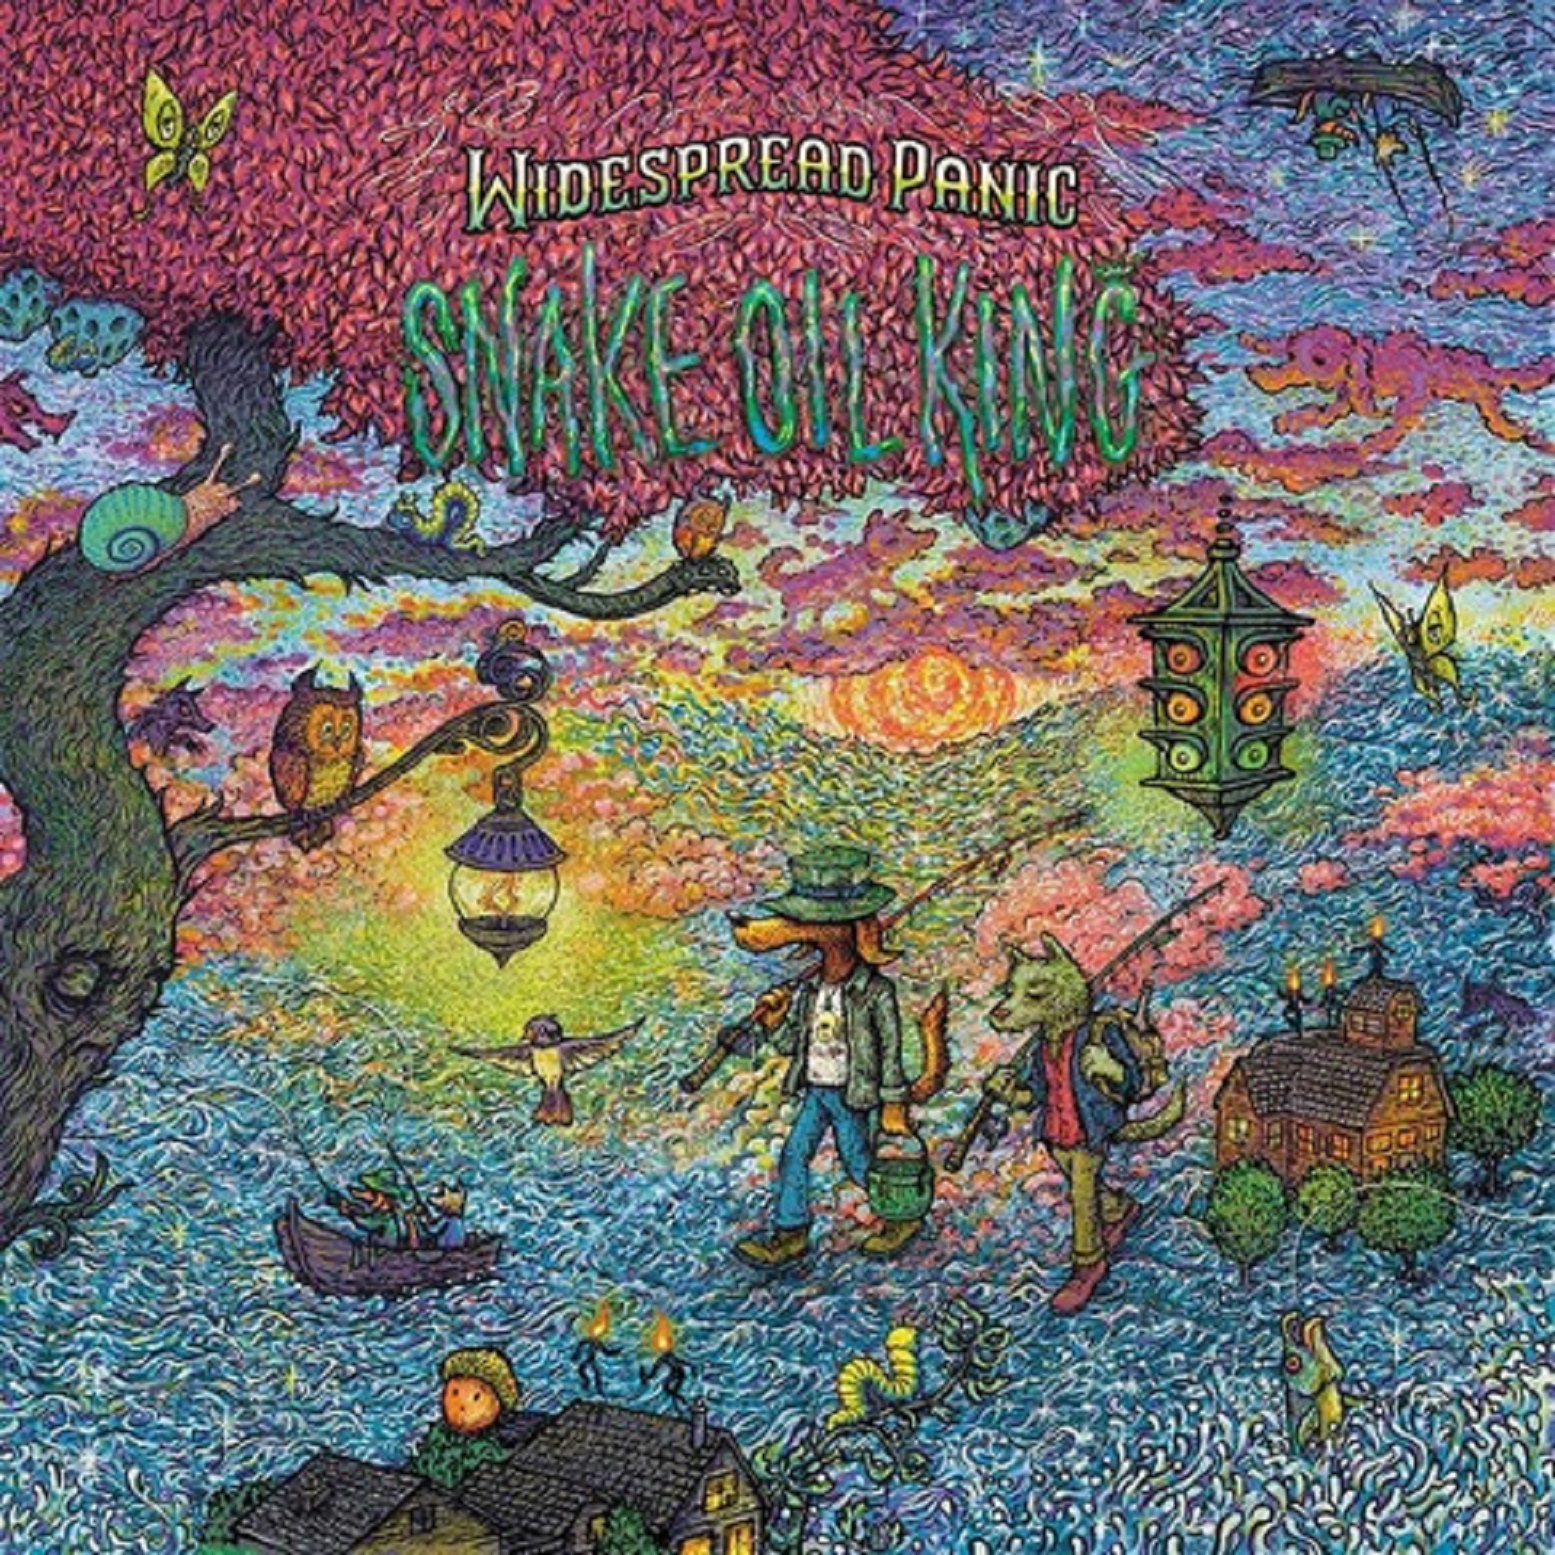 Widespread Panic Announce Surprise Release of New Album SNAKE OIL KING, This Friday, June 14th